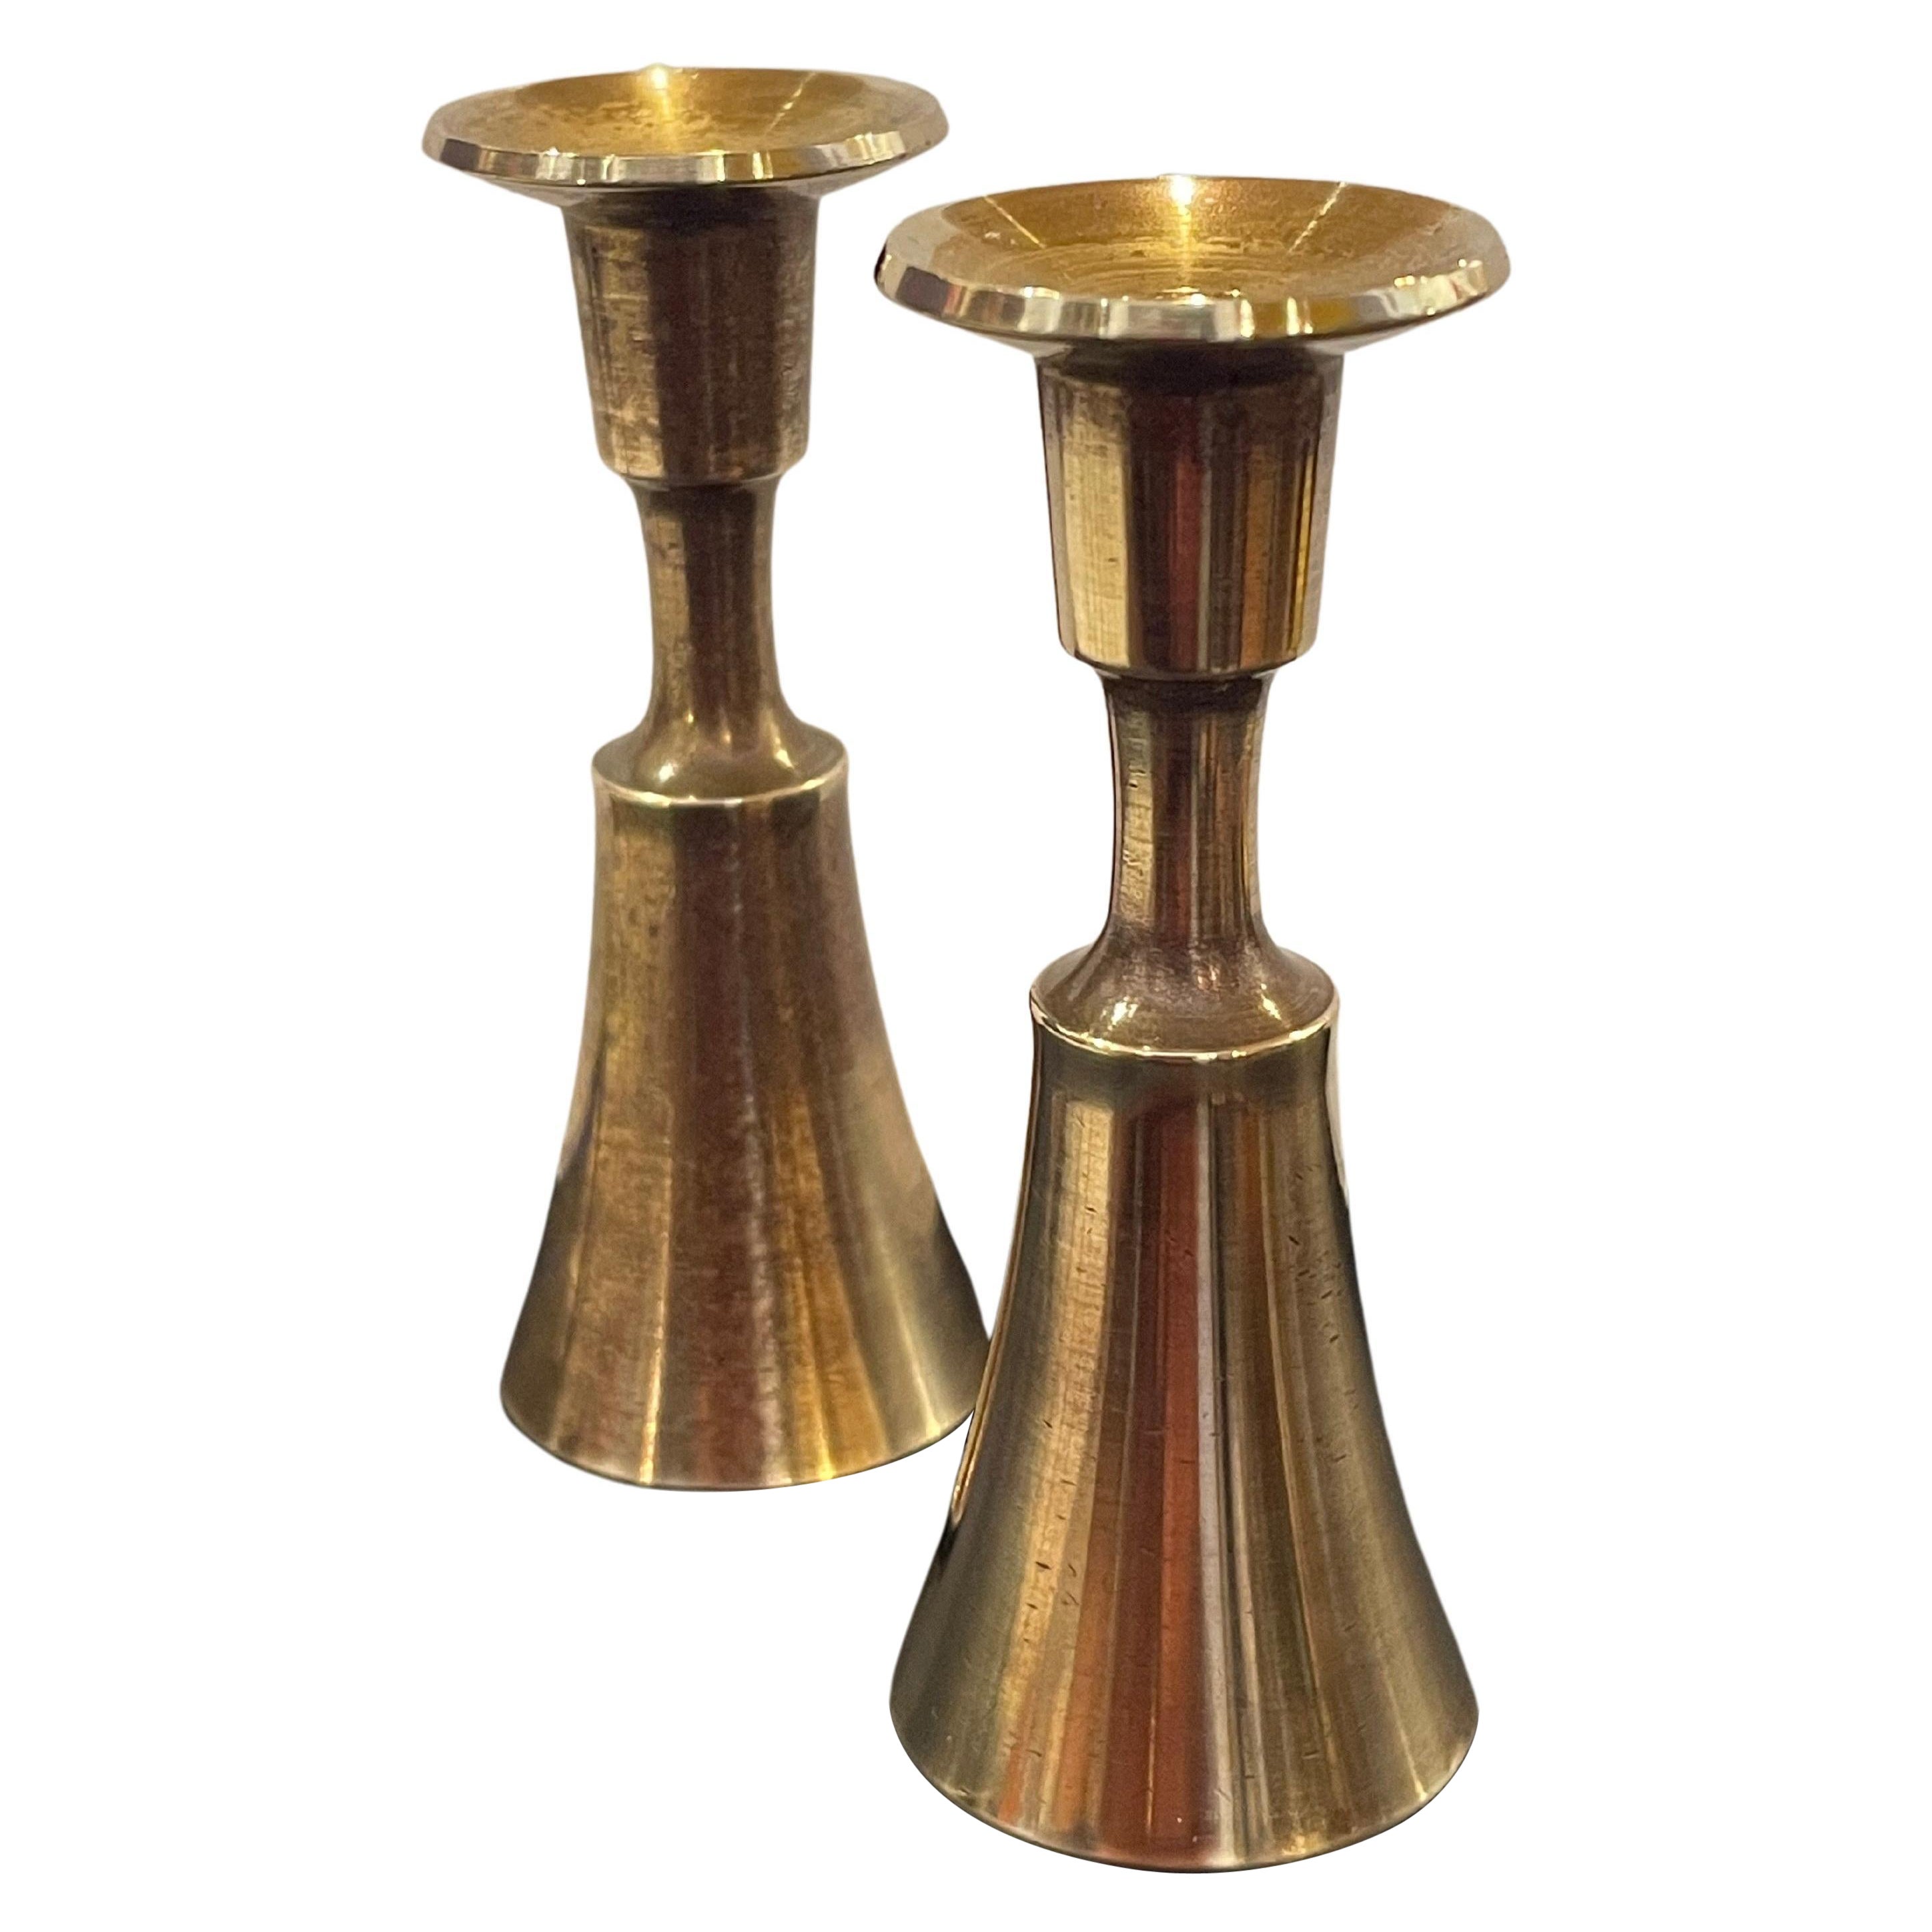 1950s Solid Polished Brass Pair of Dansk Candleholders by Quistgaard